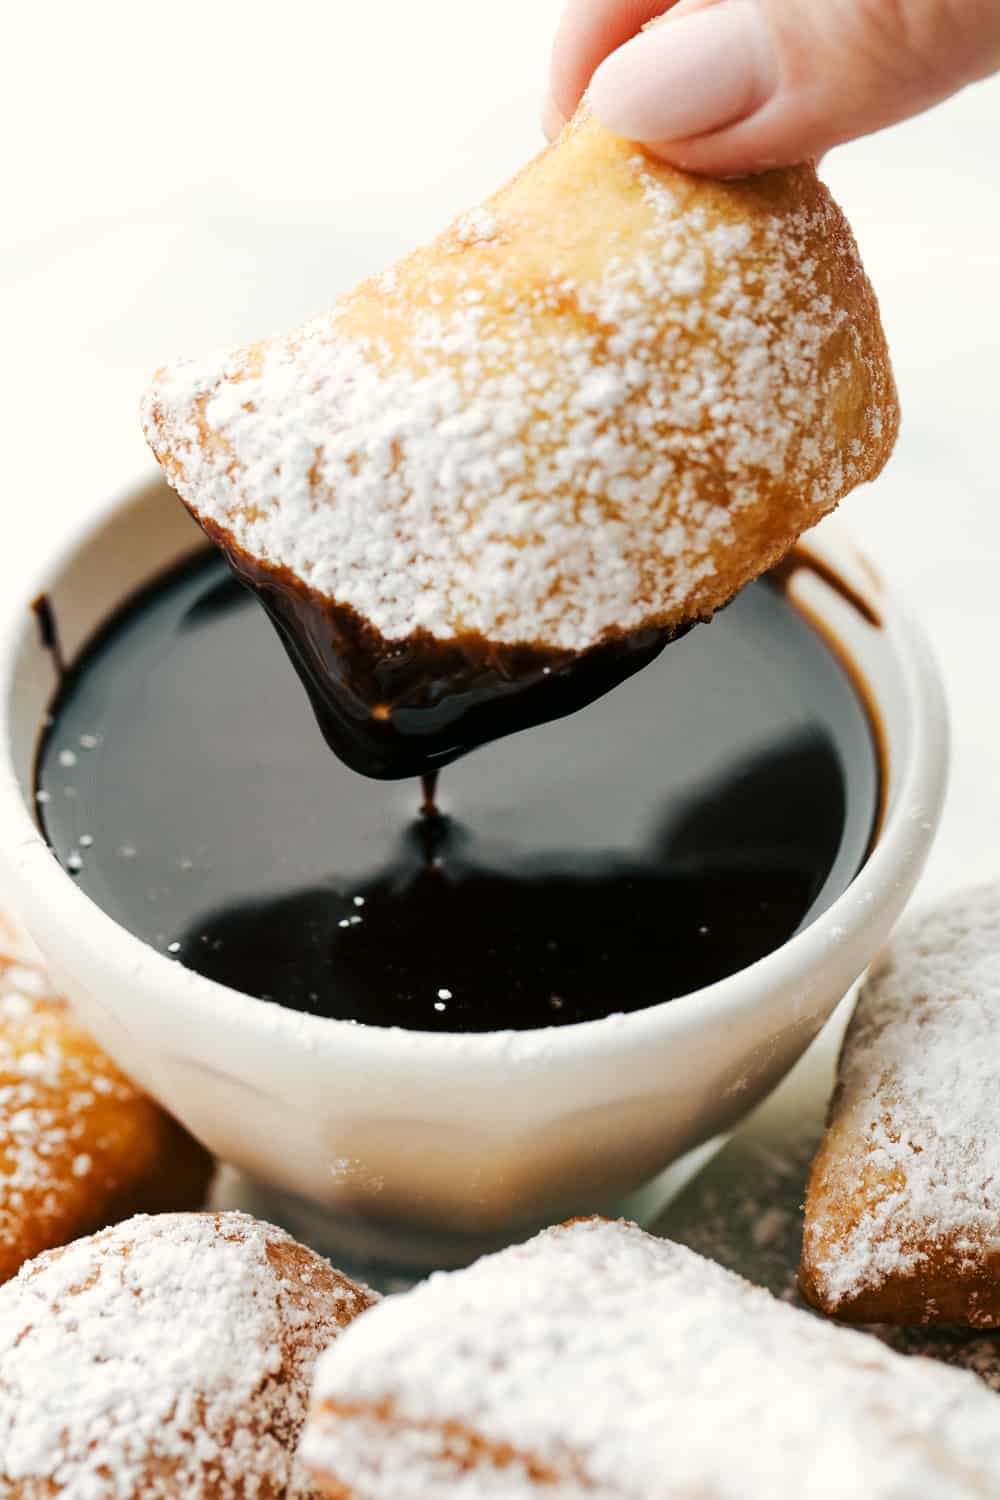 A beignet covered in powder sugar then being dipped in chocolate syrup.